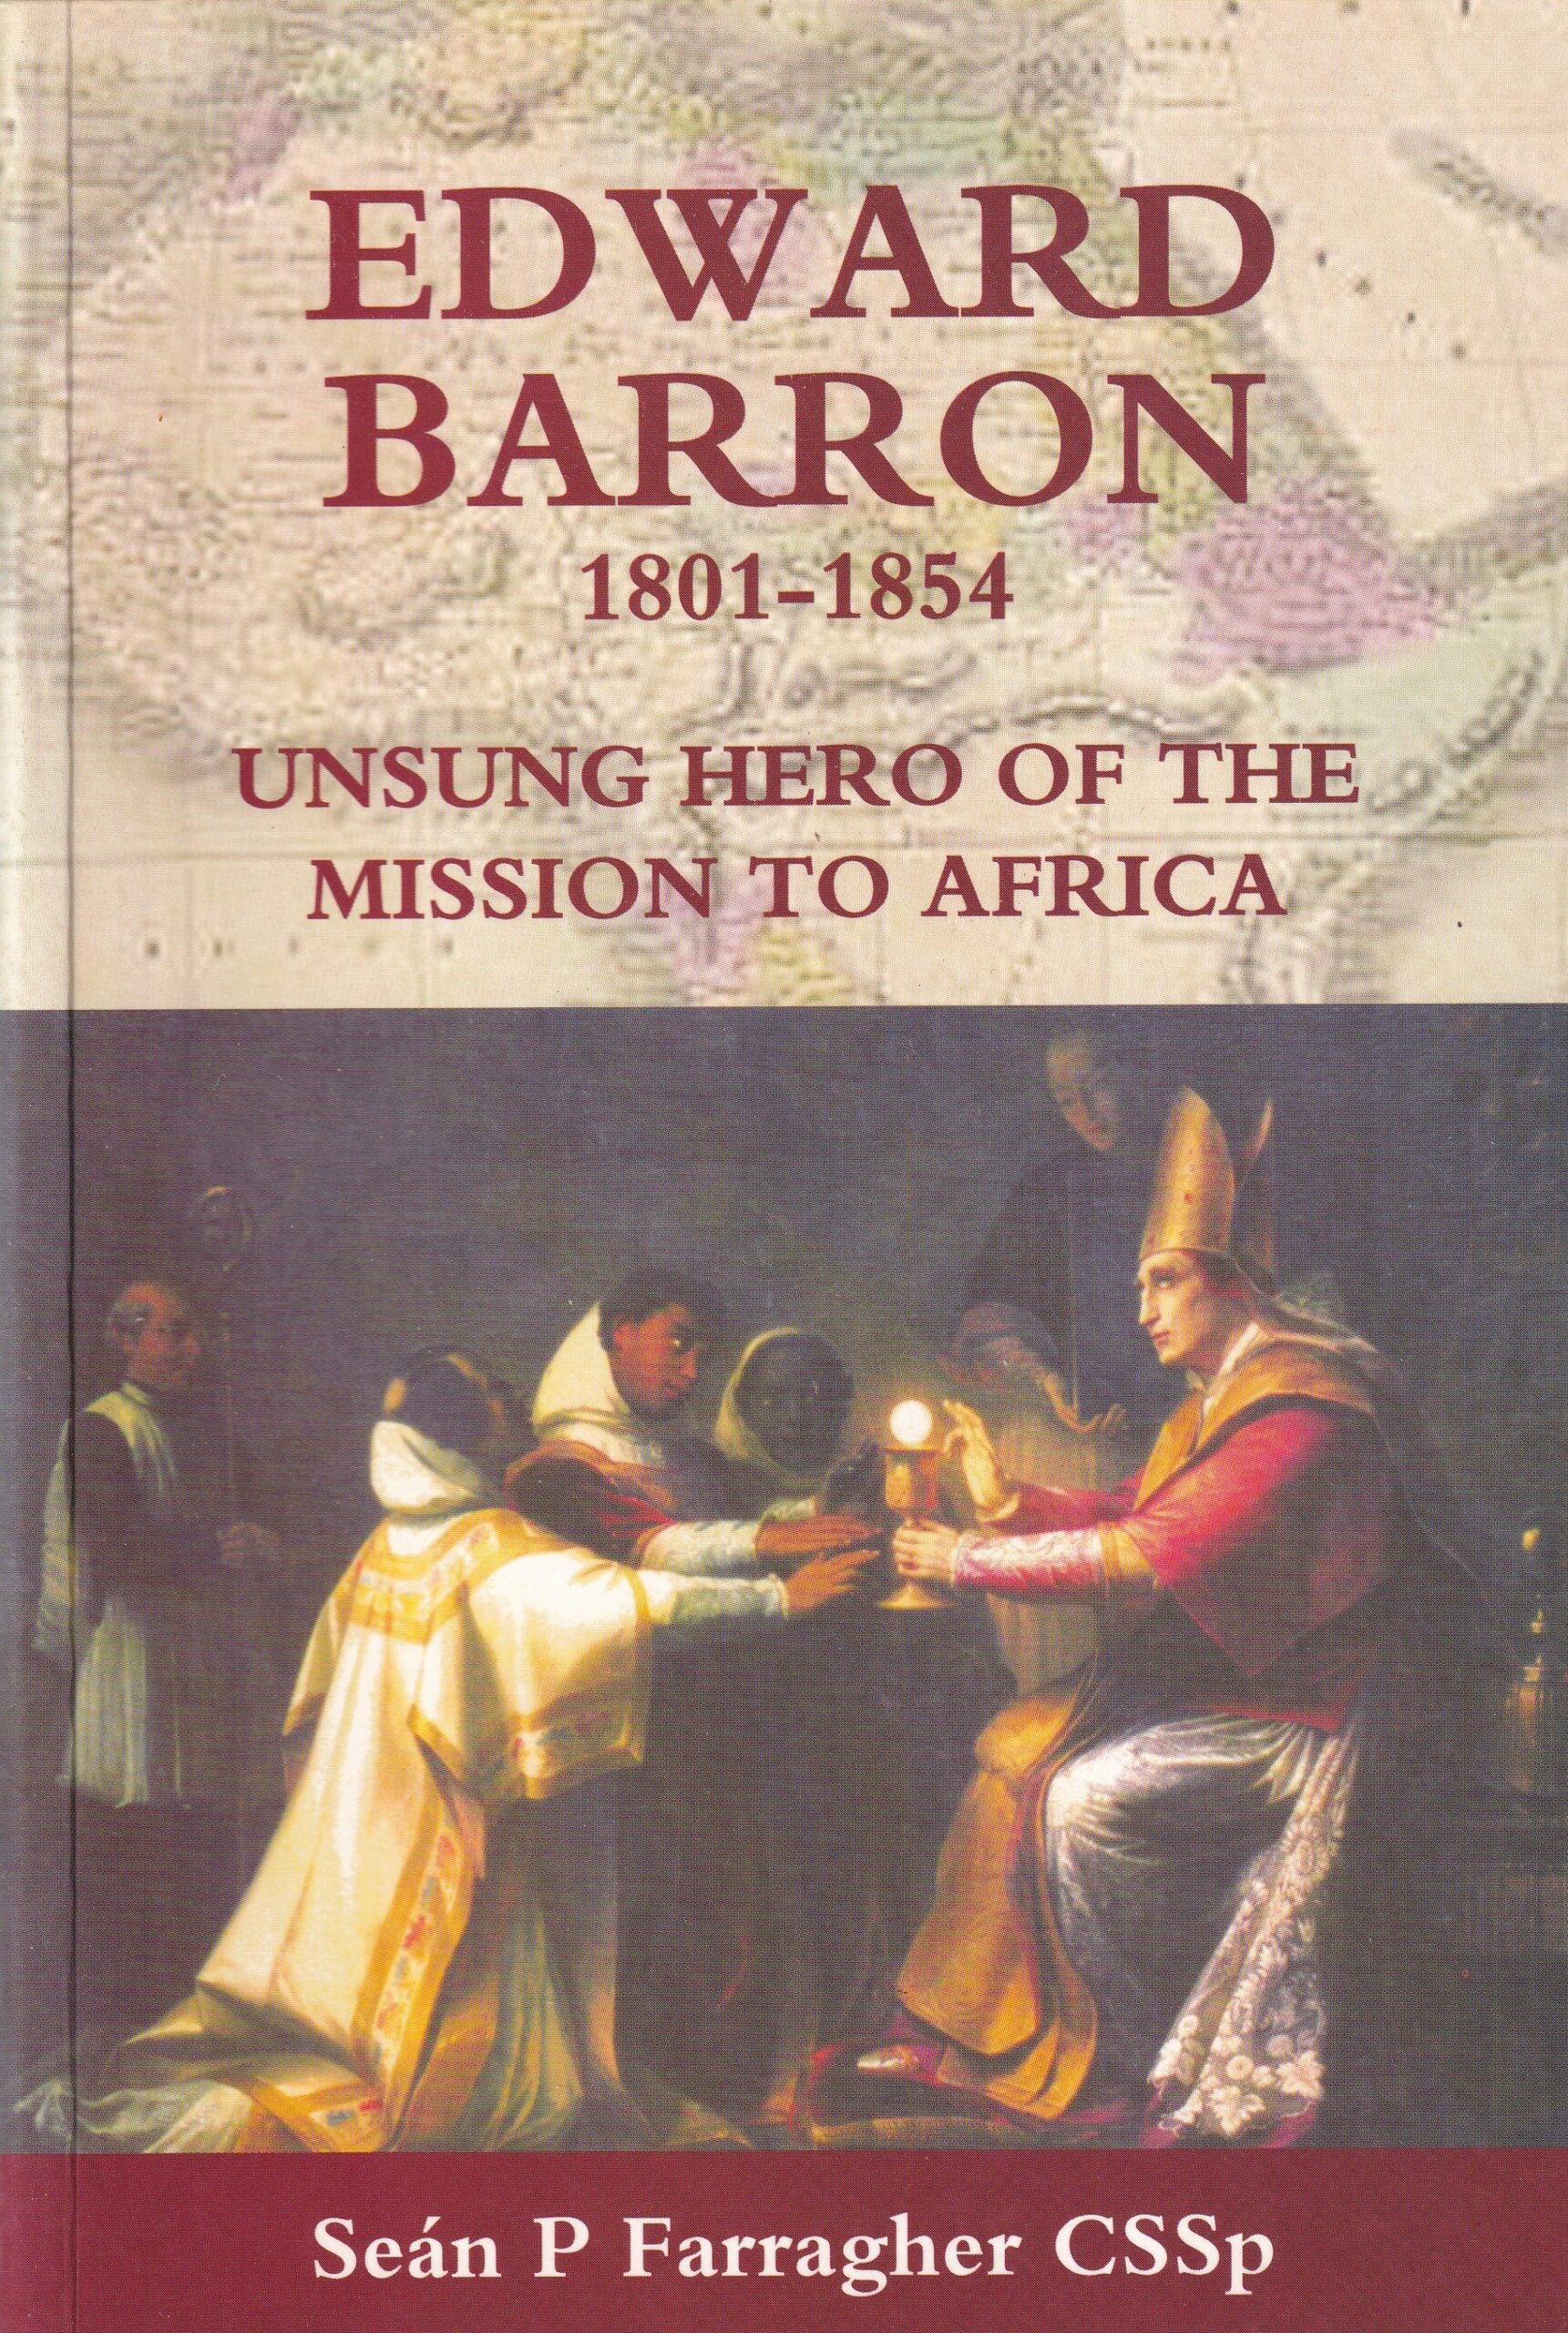 Edward Barron 1801-1854: Unsung Hero of the Mission to Africa by Seán P. Farragher